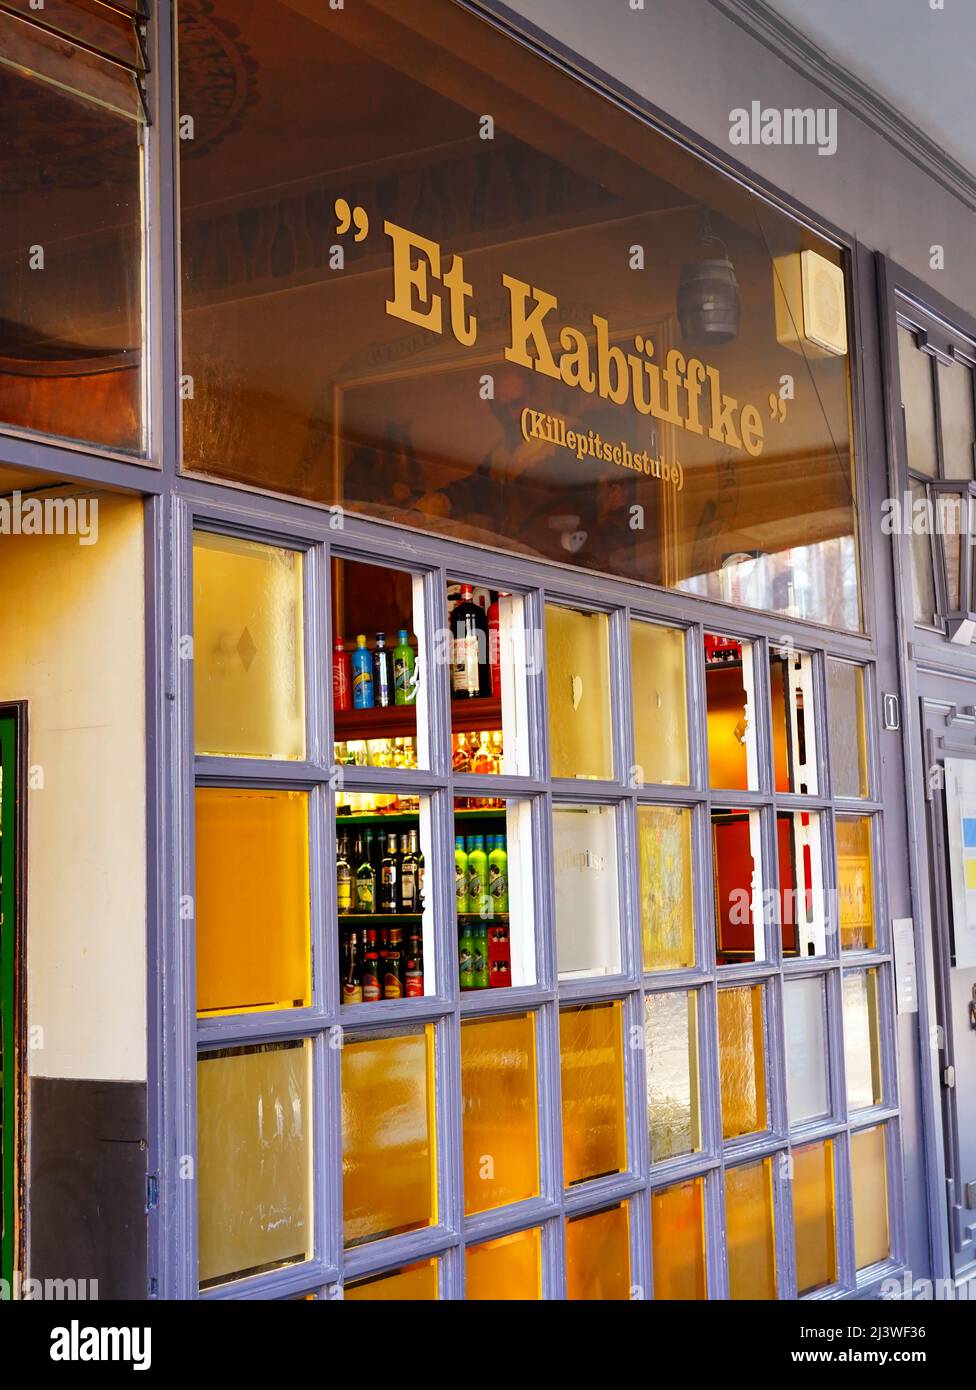 The unique bar and liqueur store 'Et Kabüffke' (Killepitsch-Stube) in Düsseldorf Old Town. It is an old-established bar and tourist attraction. Stock Photo